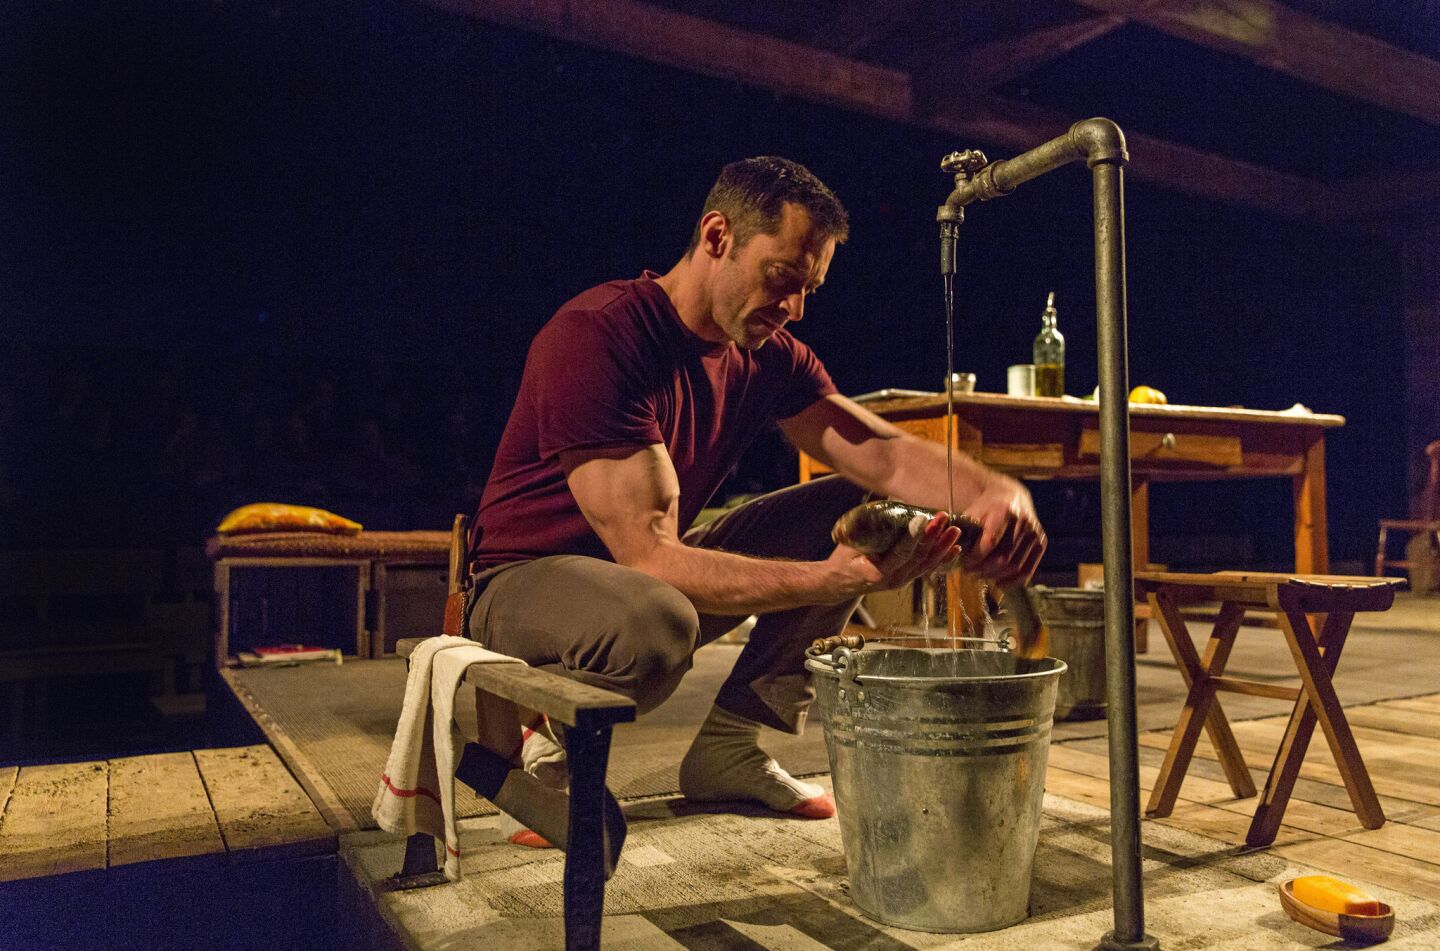 "Wolverine" actor Hugh Jackman played The Man in "The River," a play by Jez Butterworth, directed by Ian Rickson, at Circle in the Square Theatre in New York.